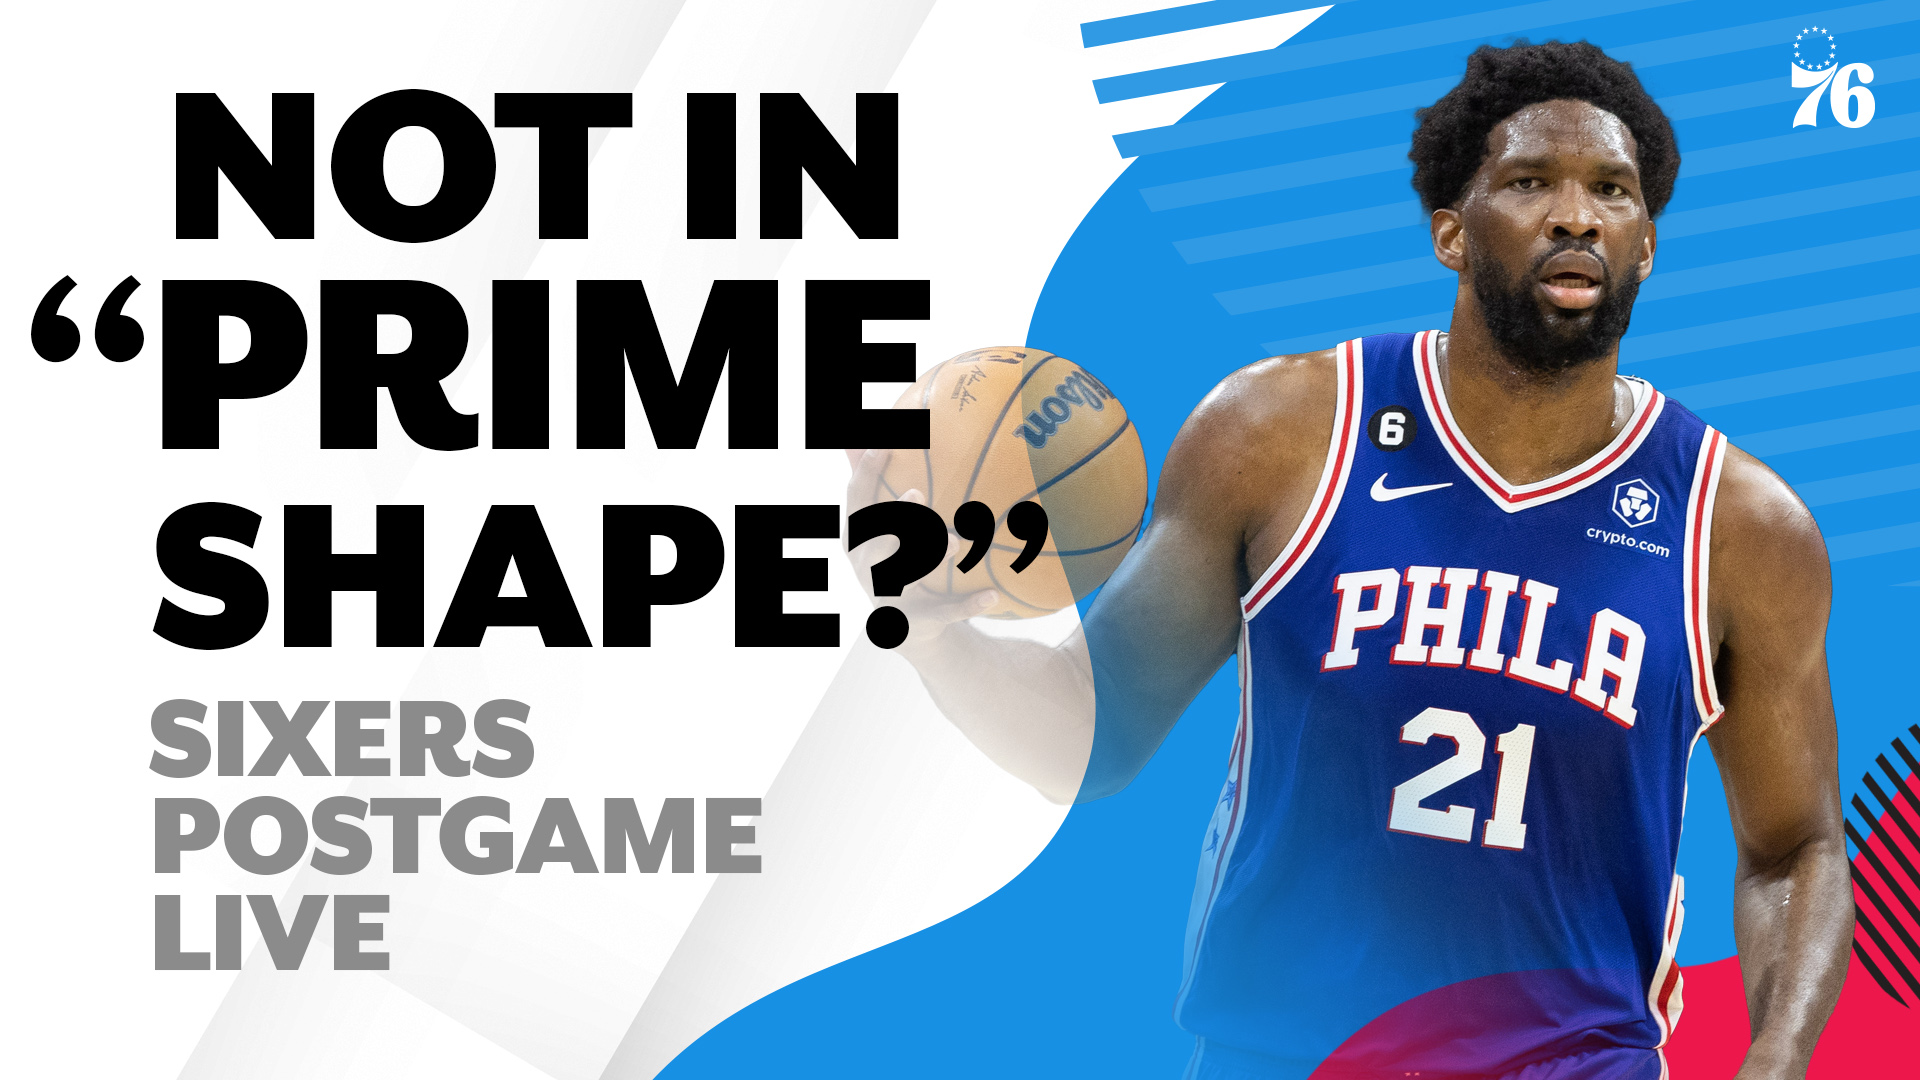 Sixers Postgame Live Embiid not in prime shape to start season?